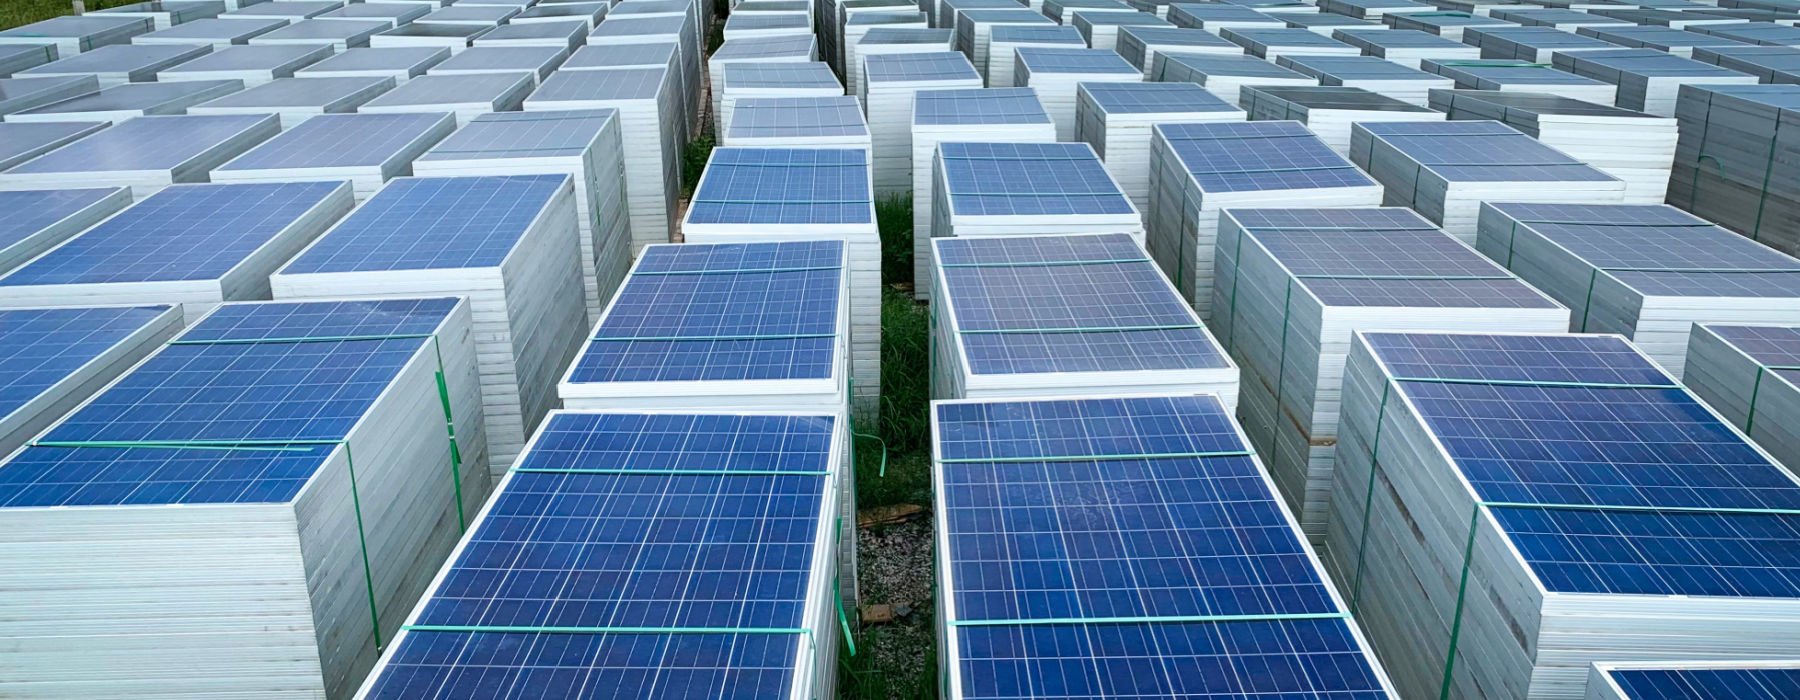 3 Reasons Why 2023 Will Be a Great Year for Solar Power in the US